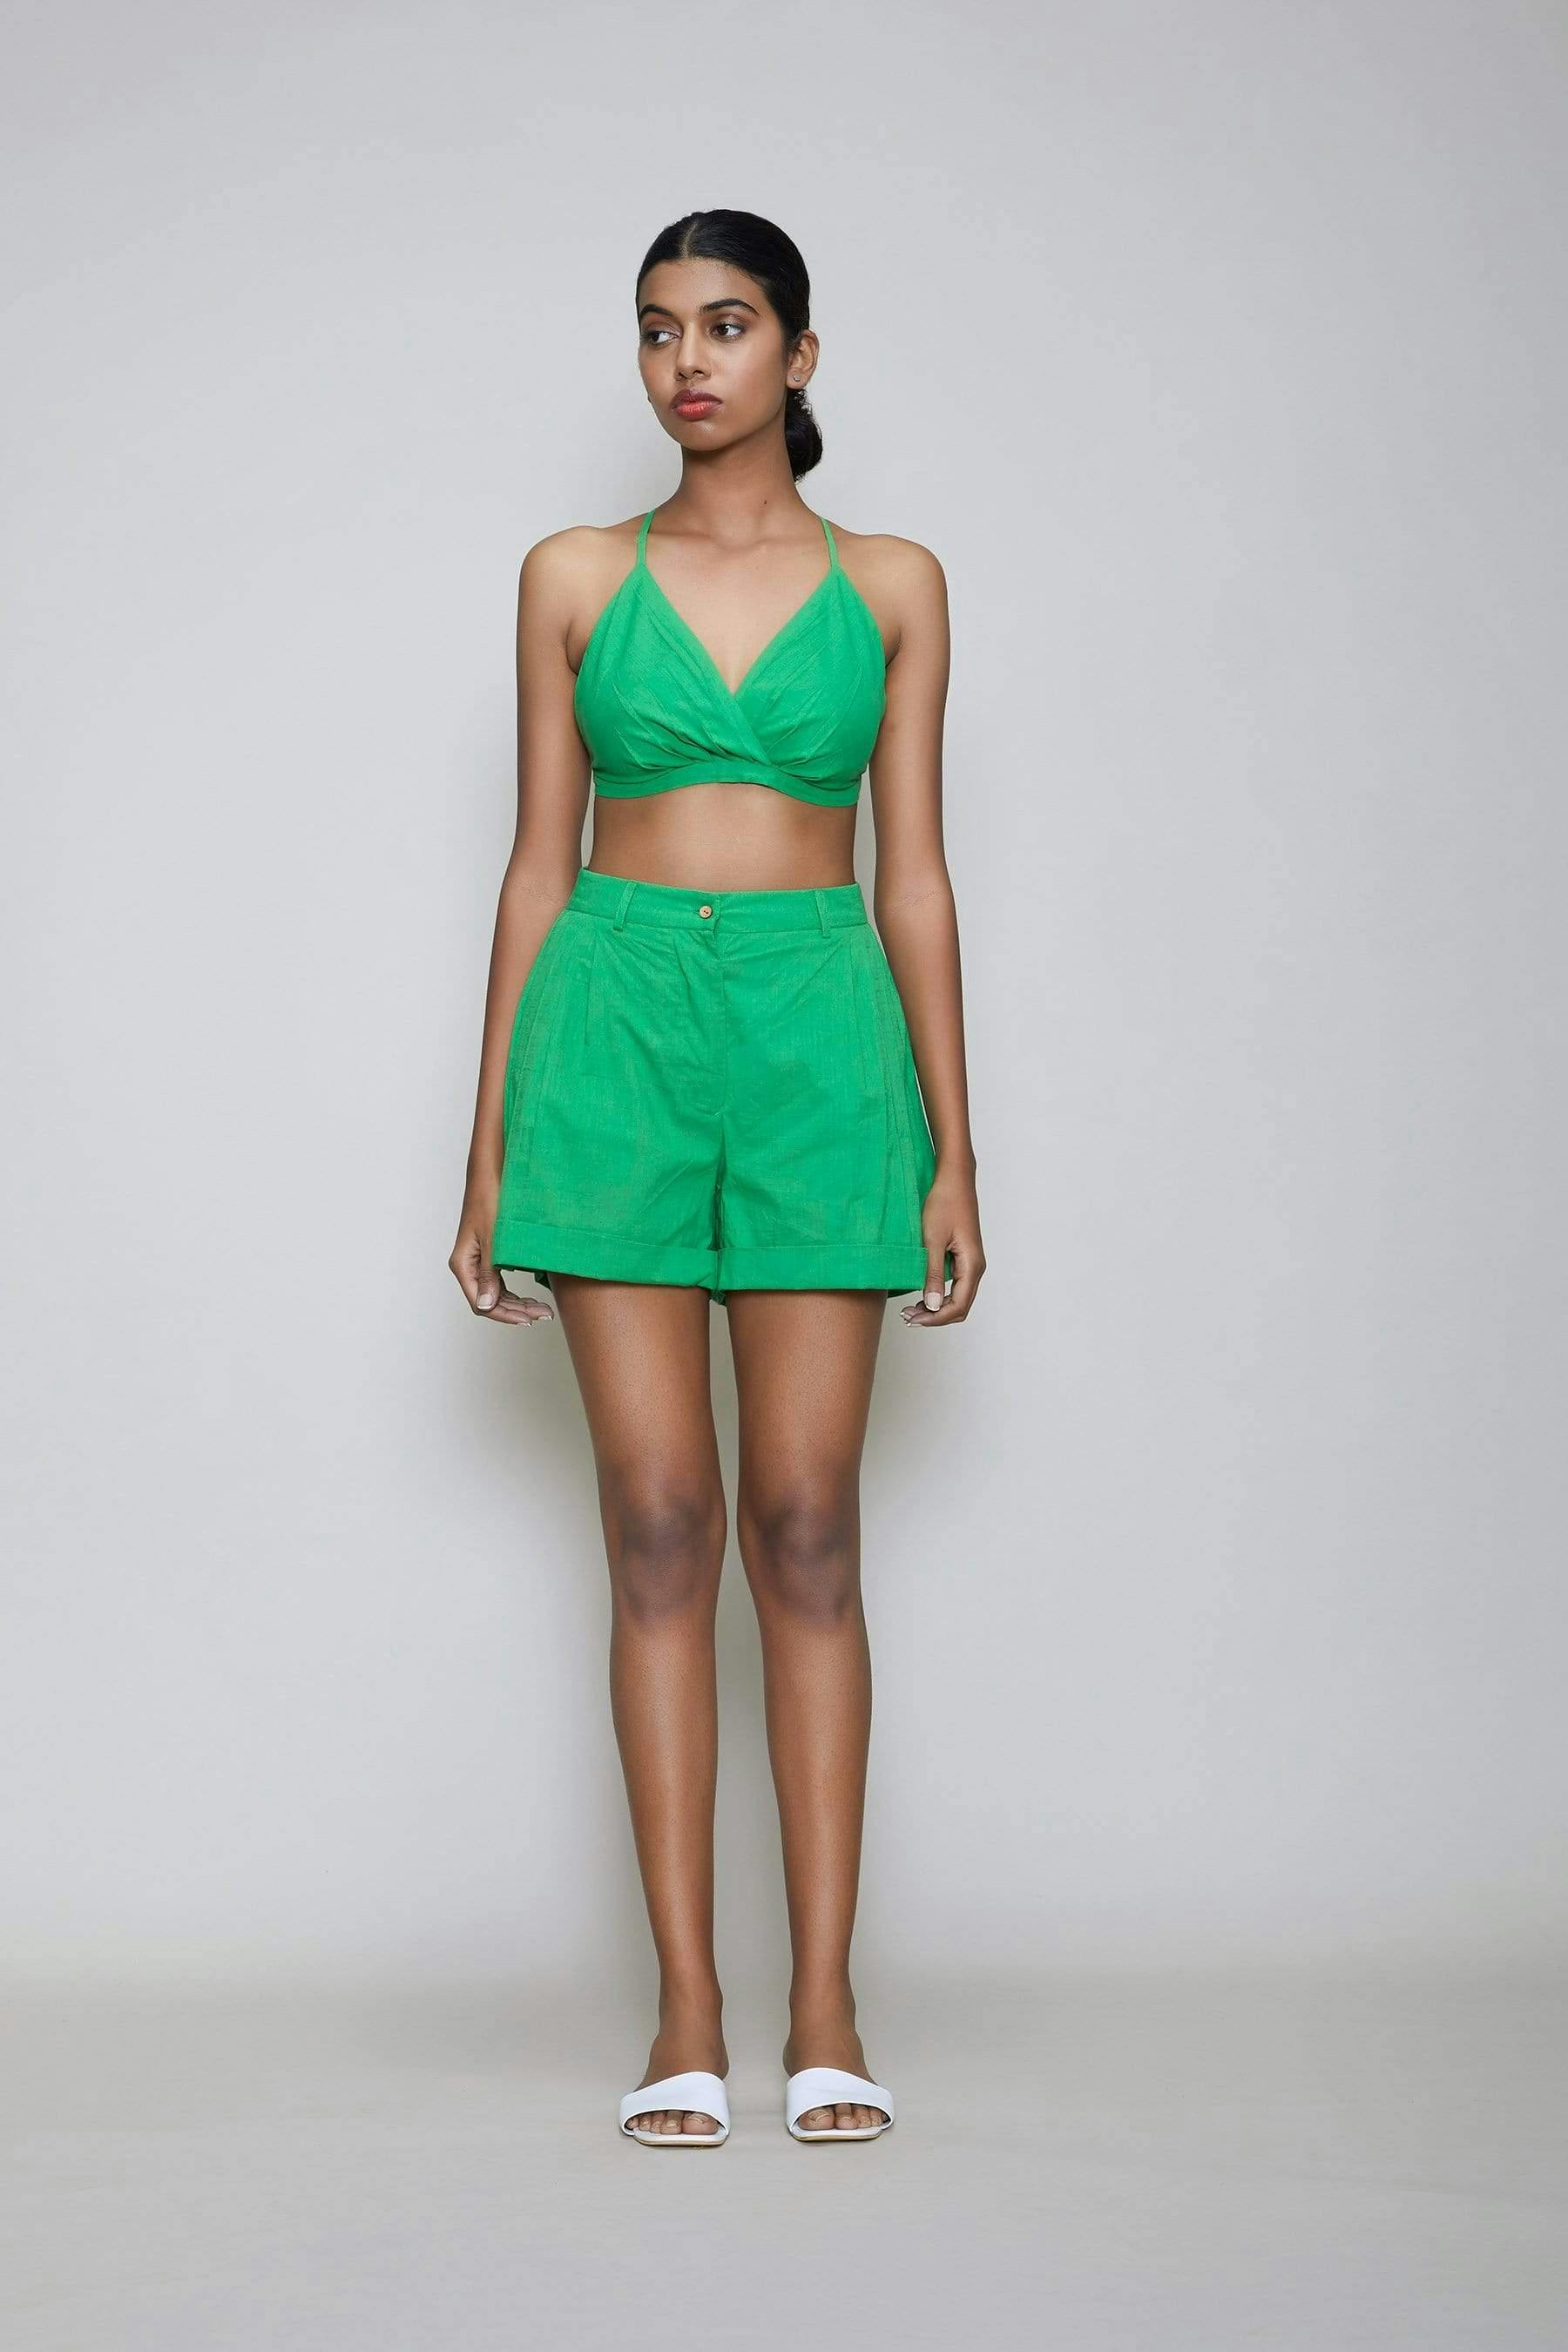 Mati Rang Bralette - Green, a product by Style Mati